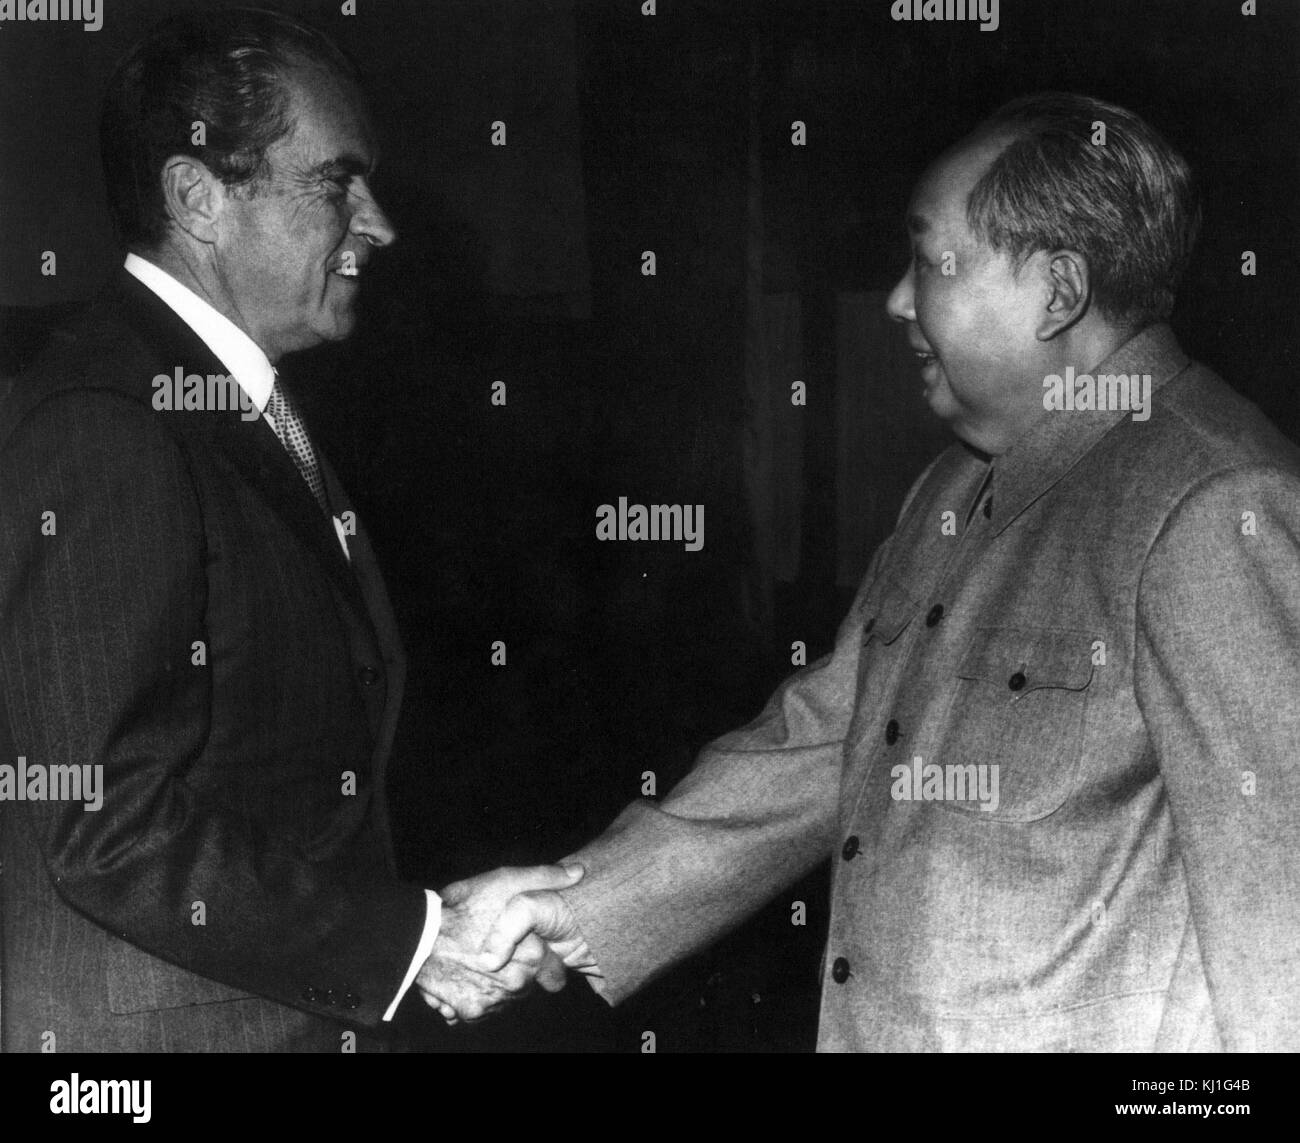 US President Richard Nixon meets Chinese Communist Party leader Chairman Mao Zedong or Mao Tse-tung (1893 – 1976), during the American President's visit to China in 1972 Stock Photo